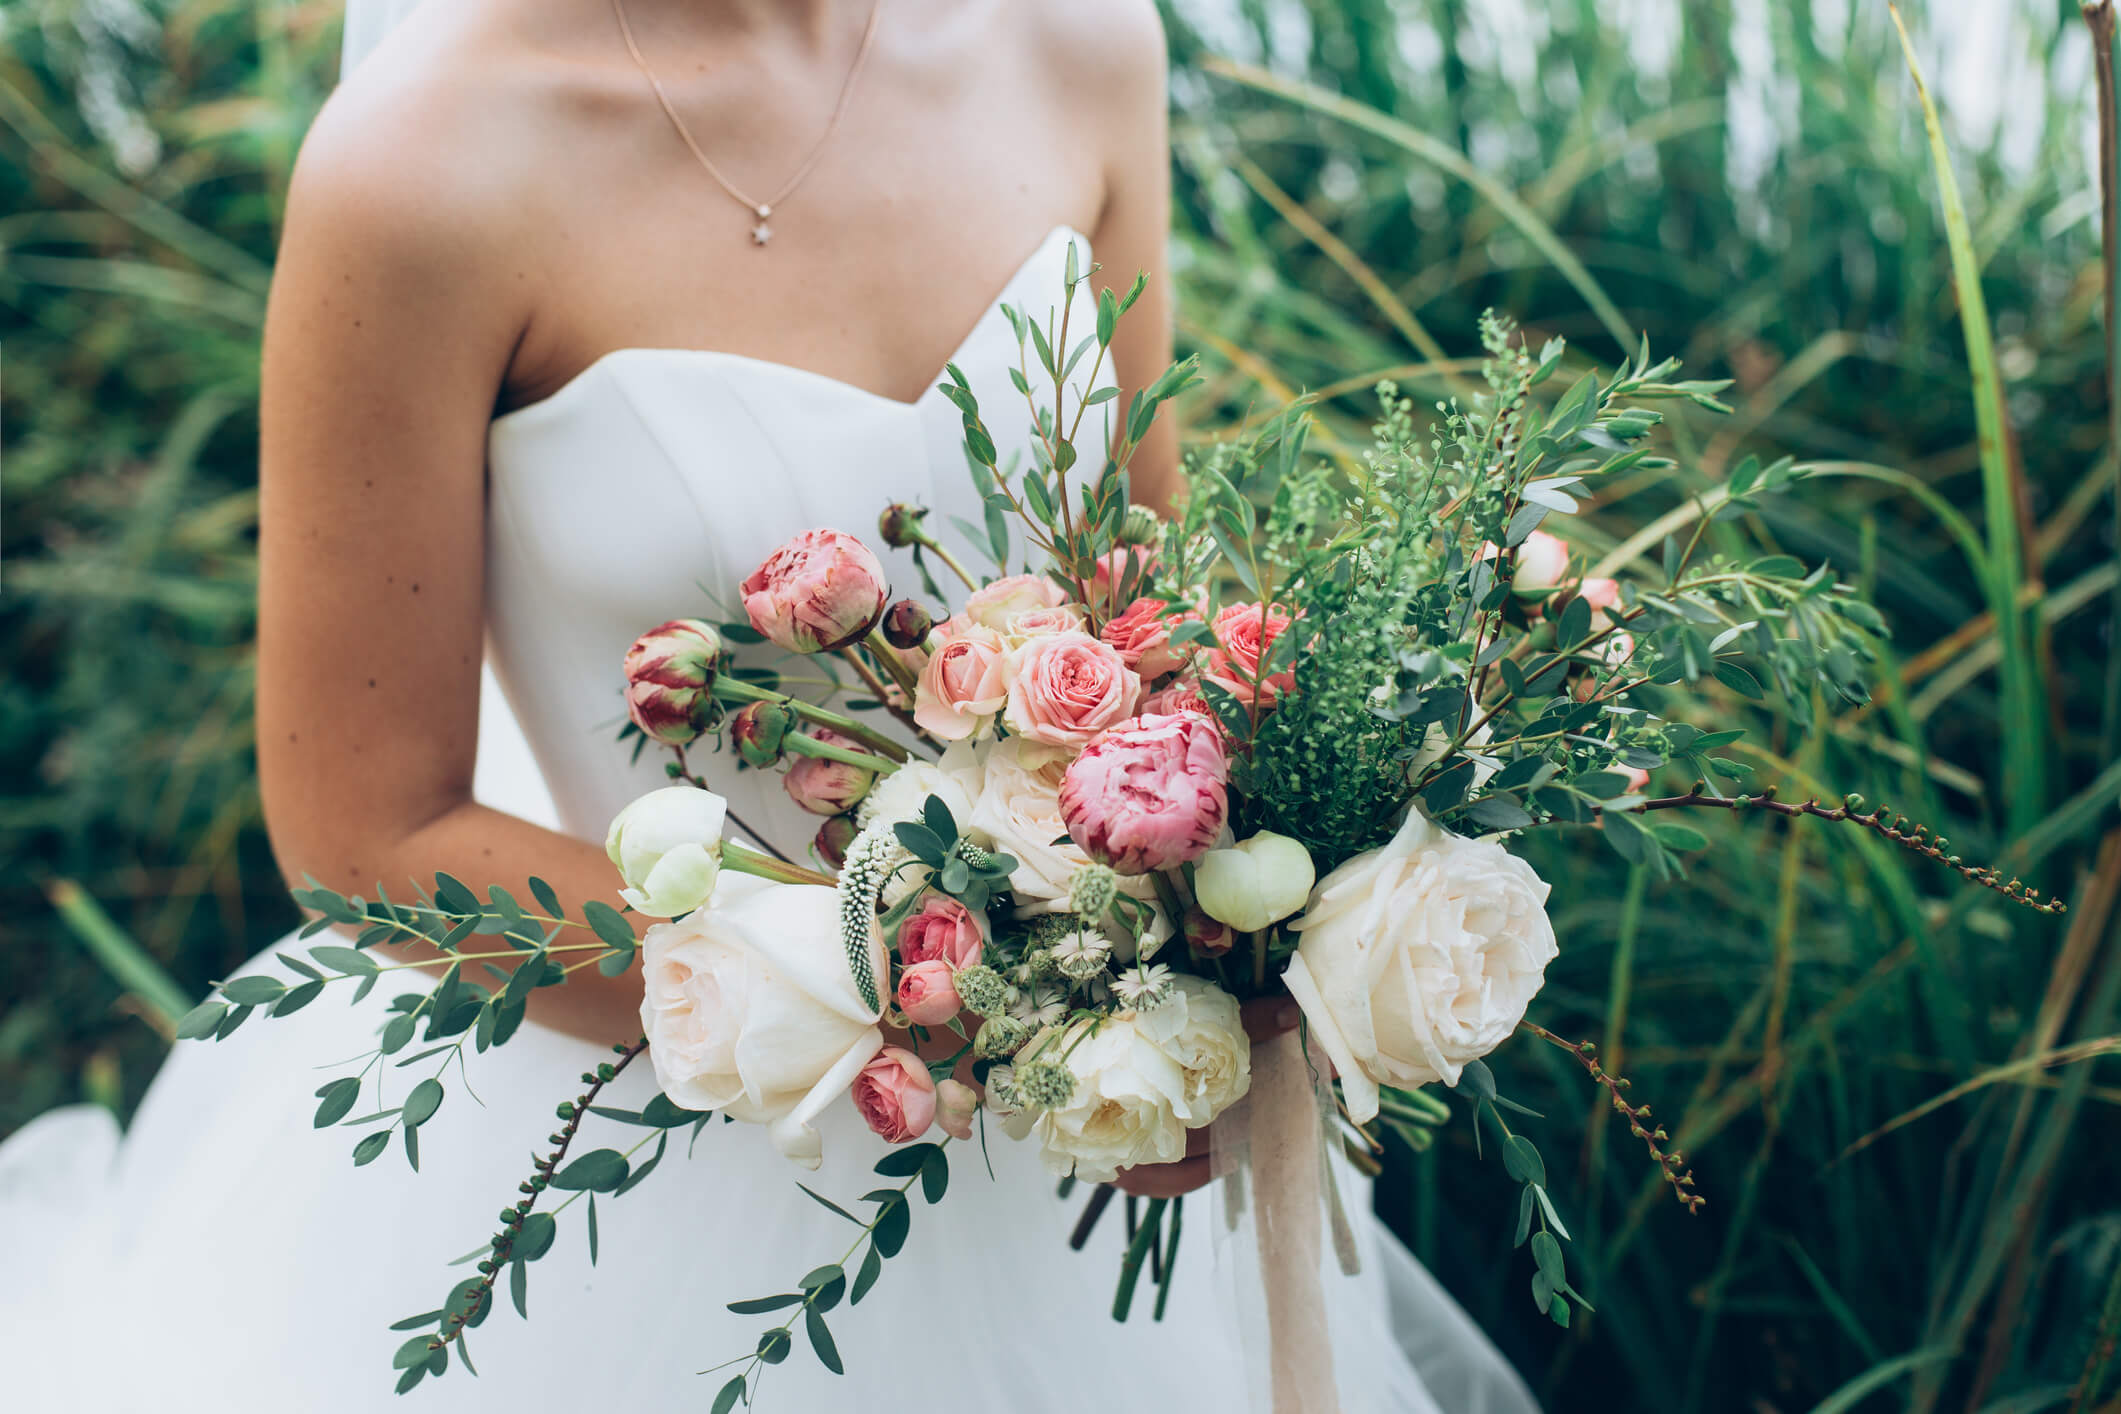 A fairytale wedding with spring wedding colors to brighten up your